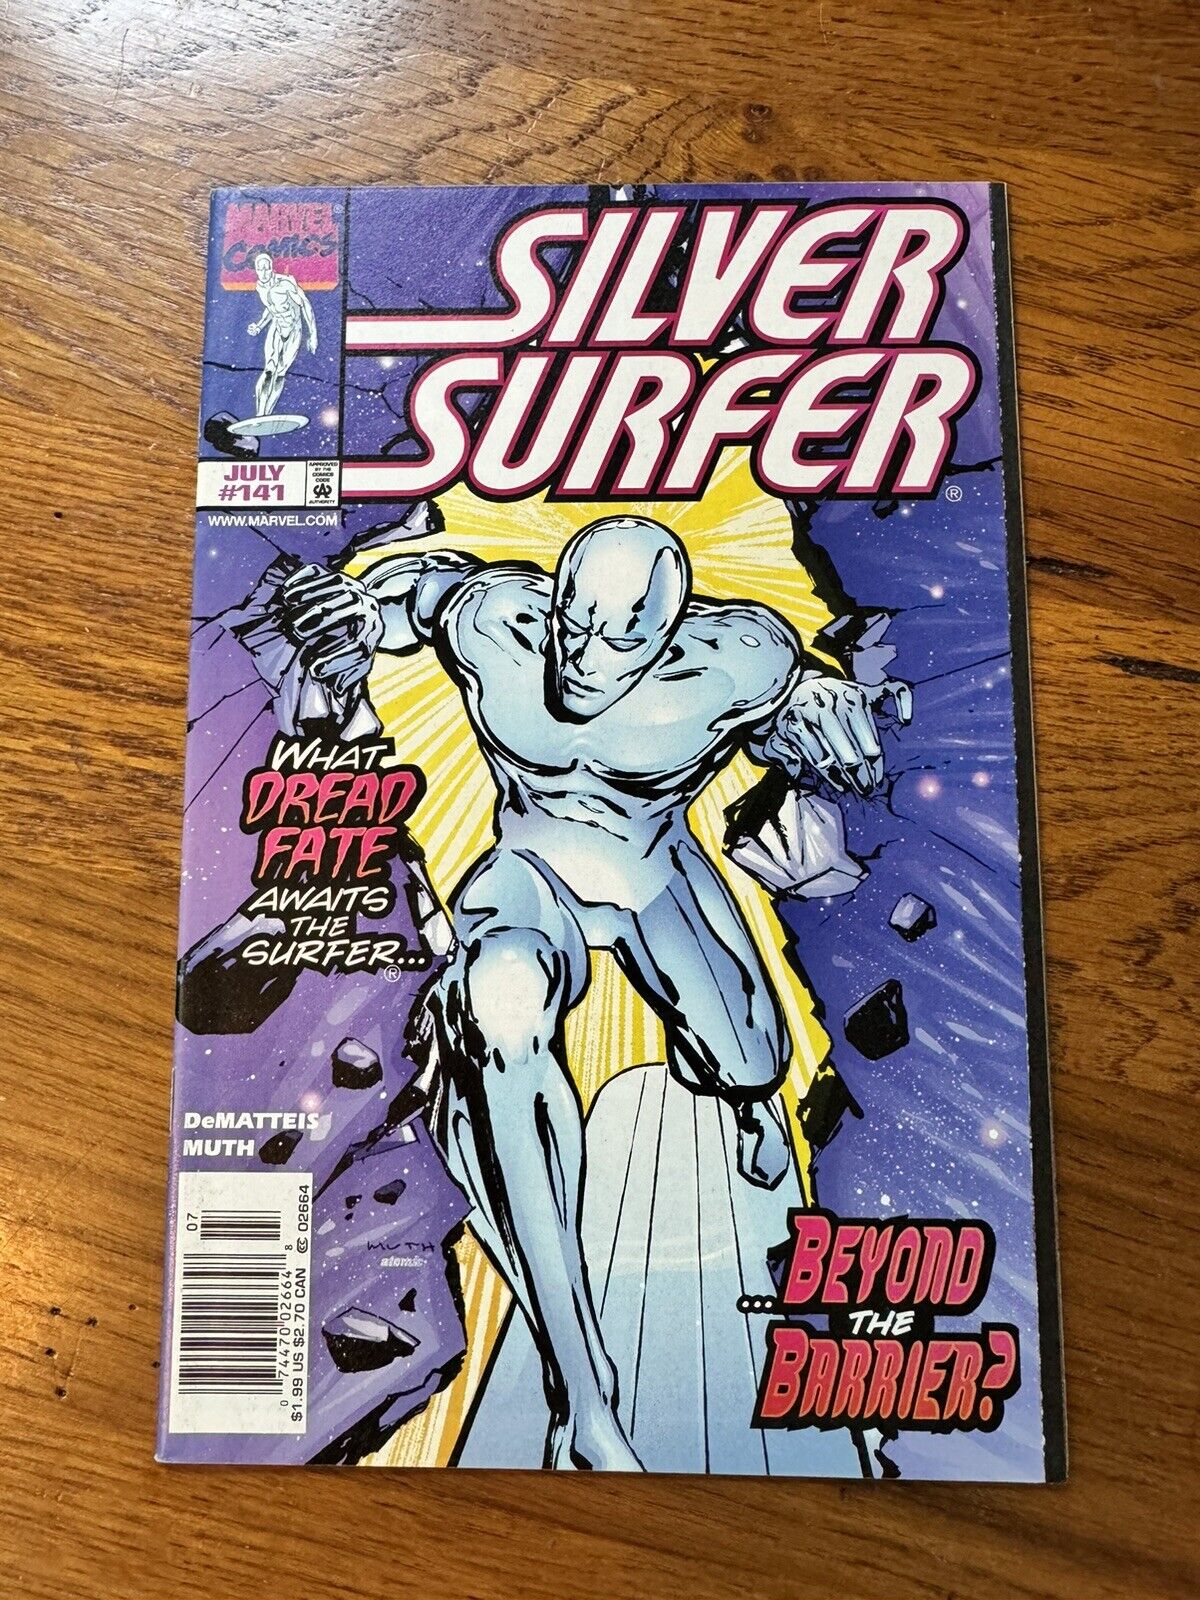 SILVER SURFER #141  MARVEL COMICS - Bagged & Boarded